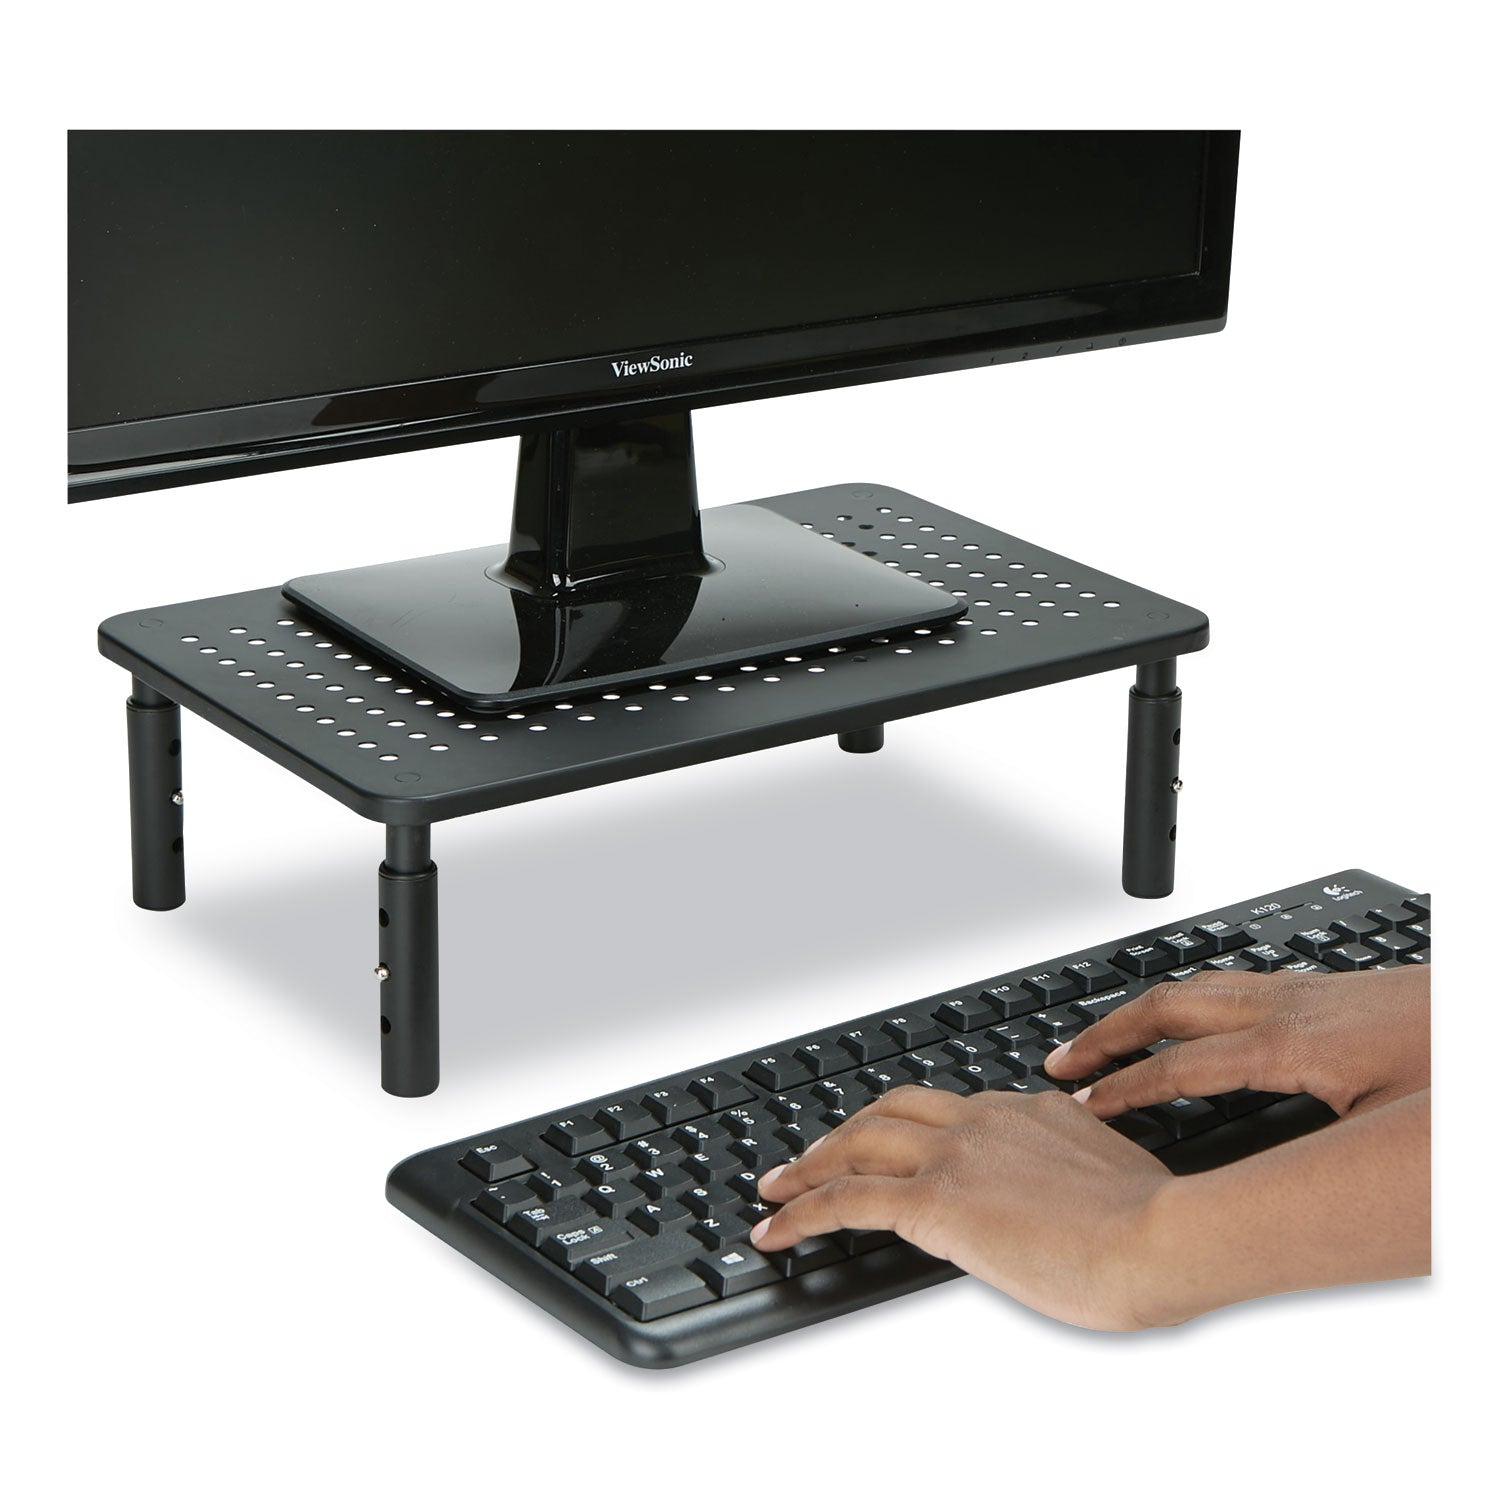 adjustable-rectangular-monitor-stand-14-x-9-x-325-to-525-black-supports-44-lbs_ems4legmetblk - 2